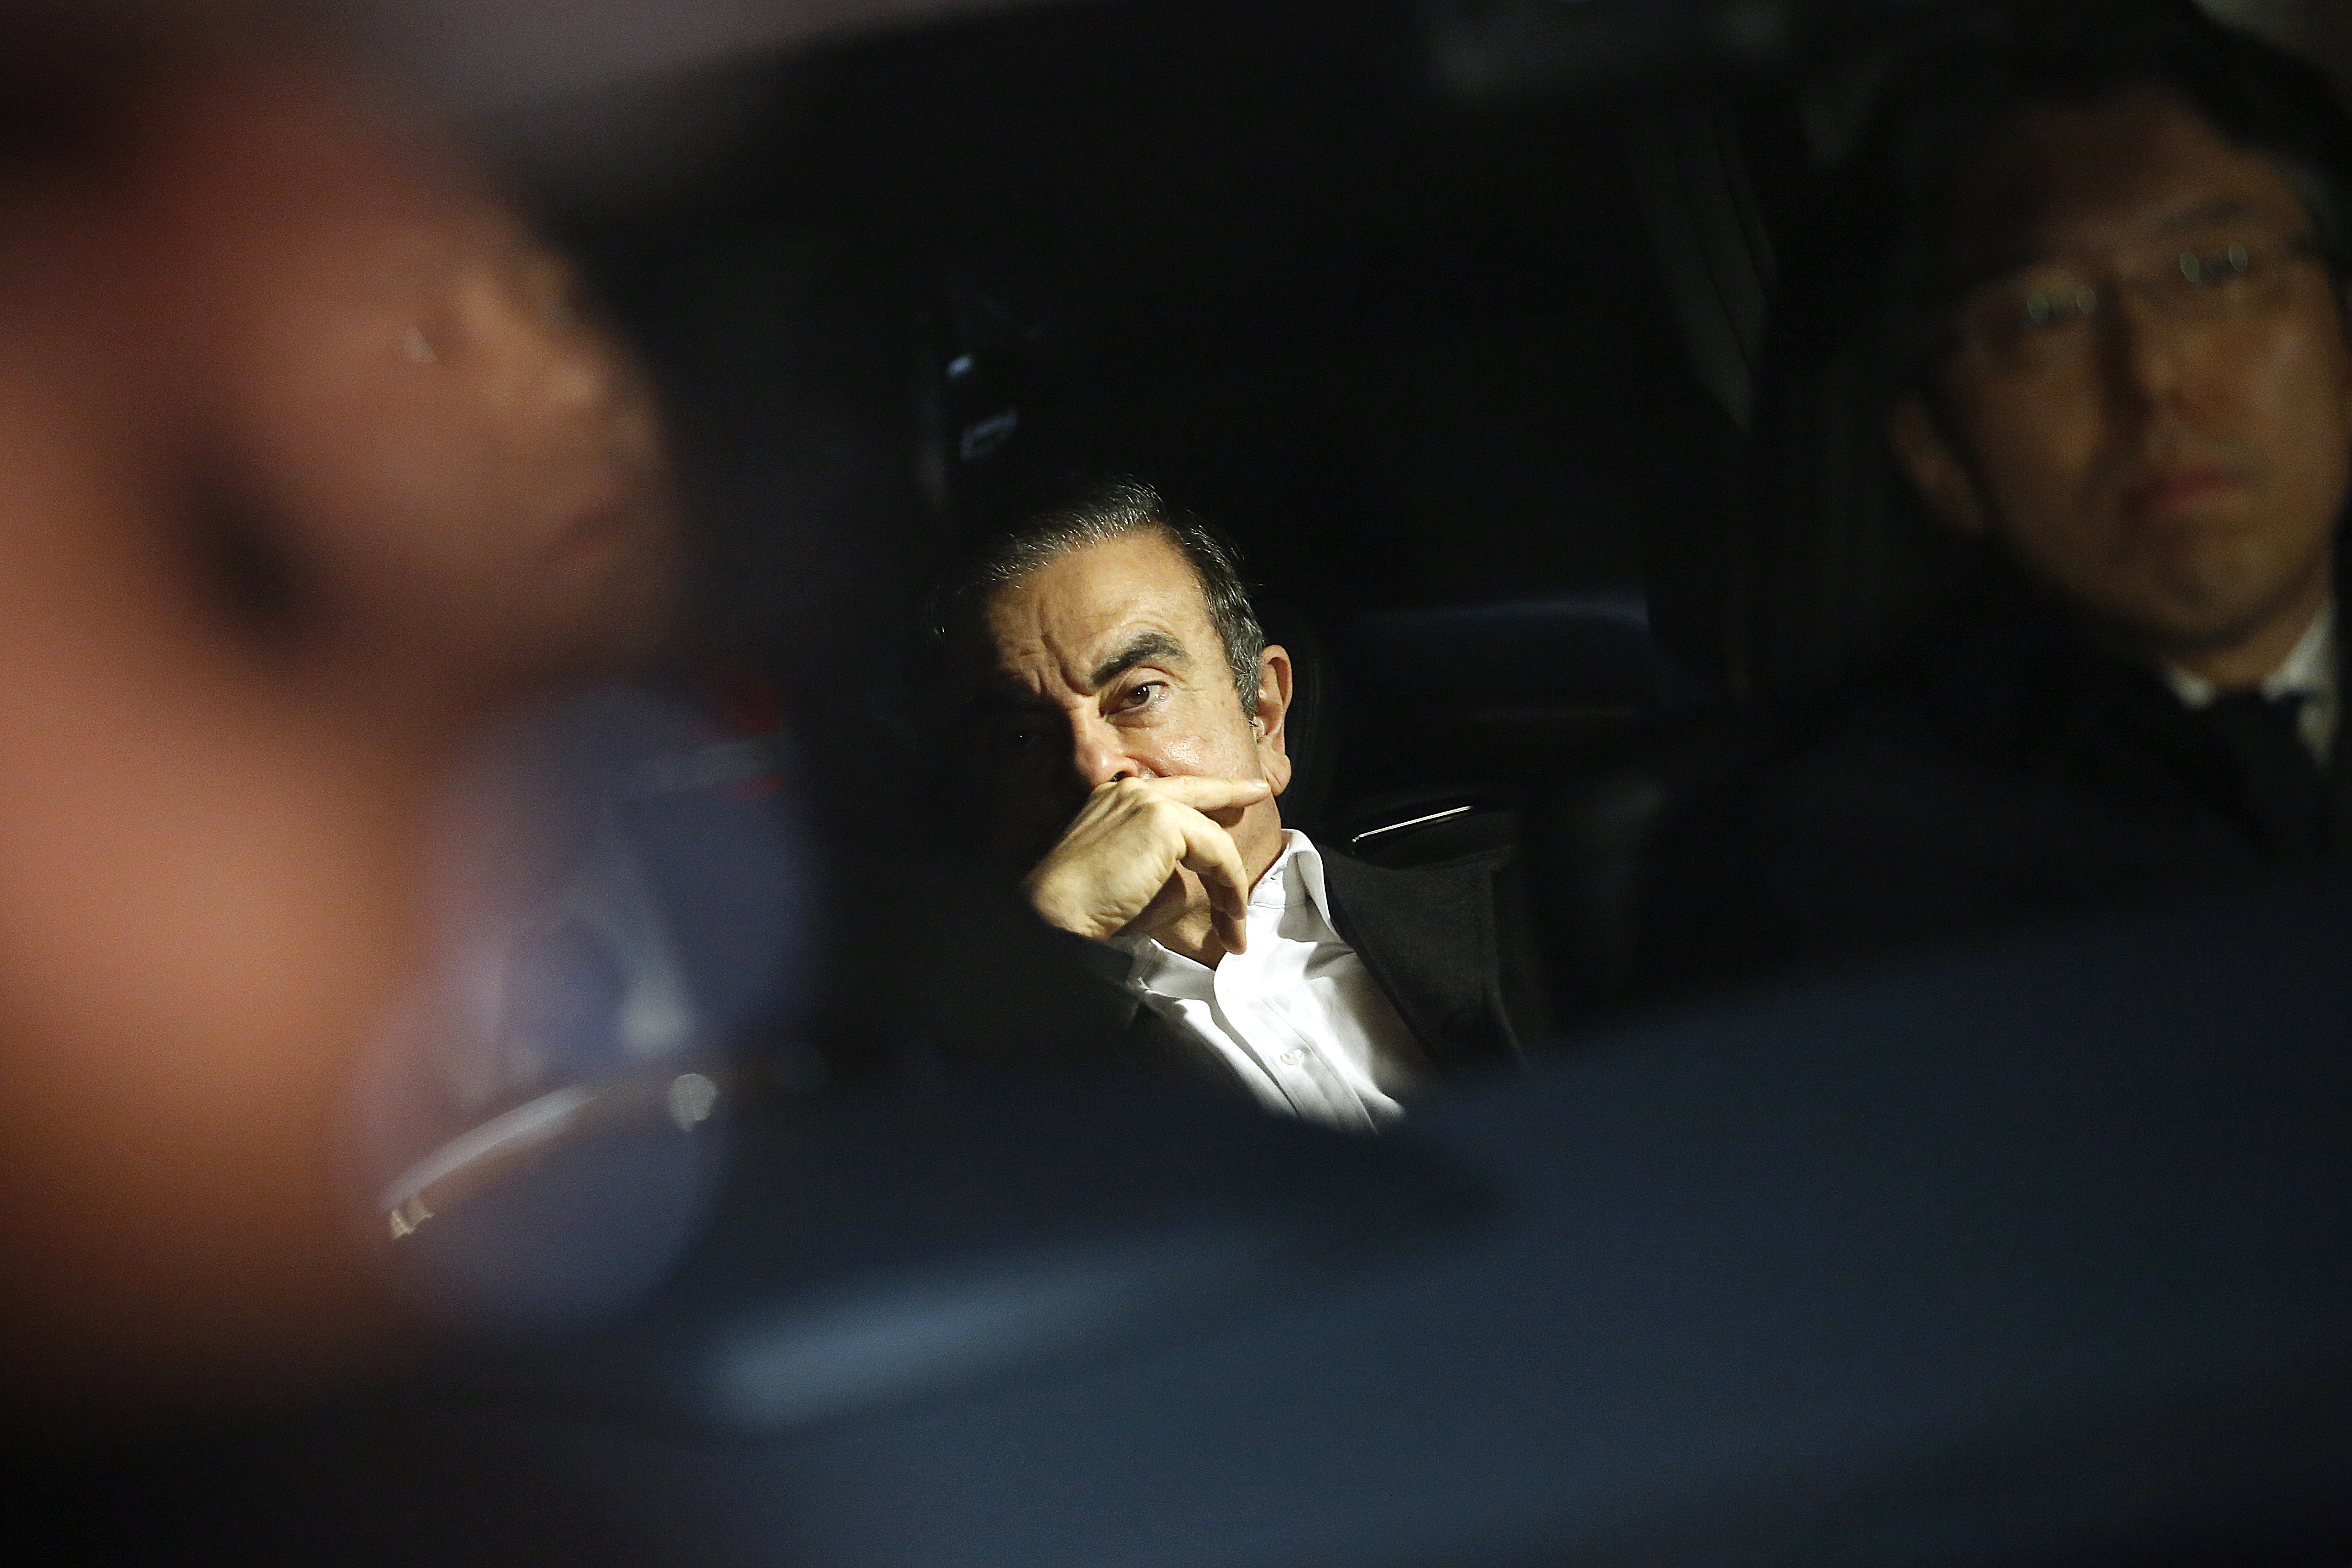 Bloomberg Best of the Year 2019: Carlos Ghosn, former chairman of Nissan Motor Co., center, sits in a vehicle as he leaves his lawyer&#039;s office in Tokyo, Japan, on Wednesday, March 6, 2019. Ph